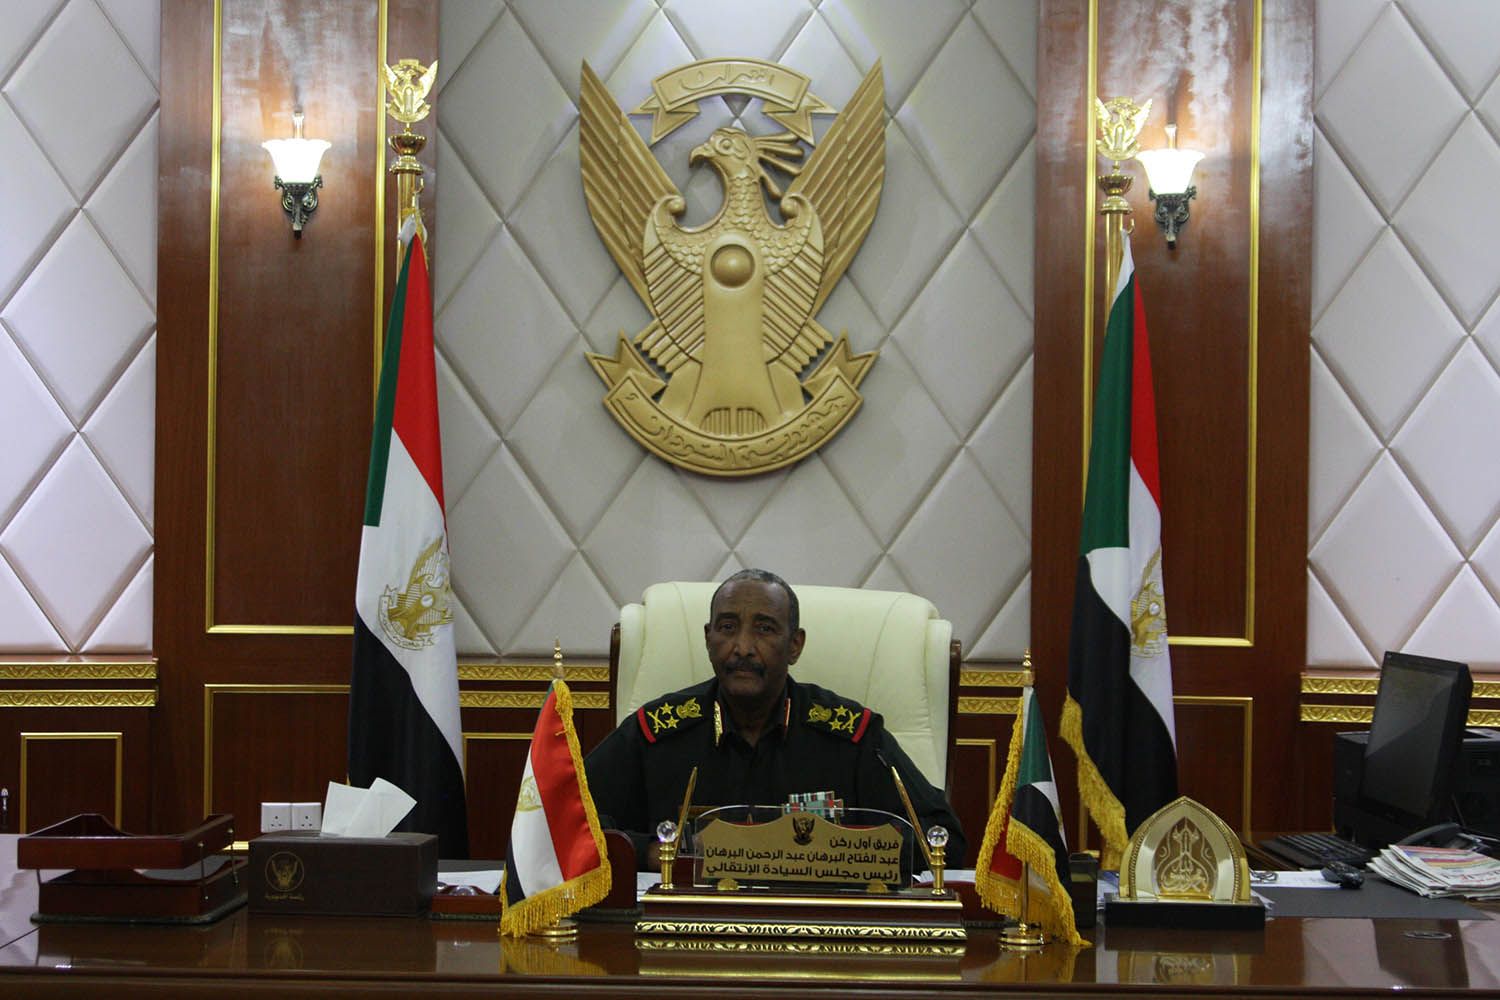 Lt. Gen. Abdel Fattah al-Burhan, the head of Sudan’s Sovereignty Council, sits at his desk in the presidential palace in Khartoum on Nov. 5. Image by Rebecca Hamilton/ Foreign Policy. Sudan, 2019.